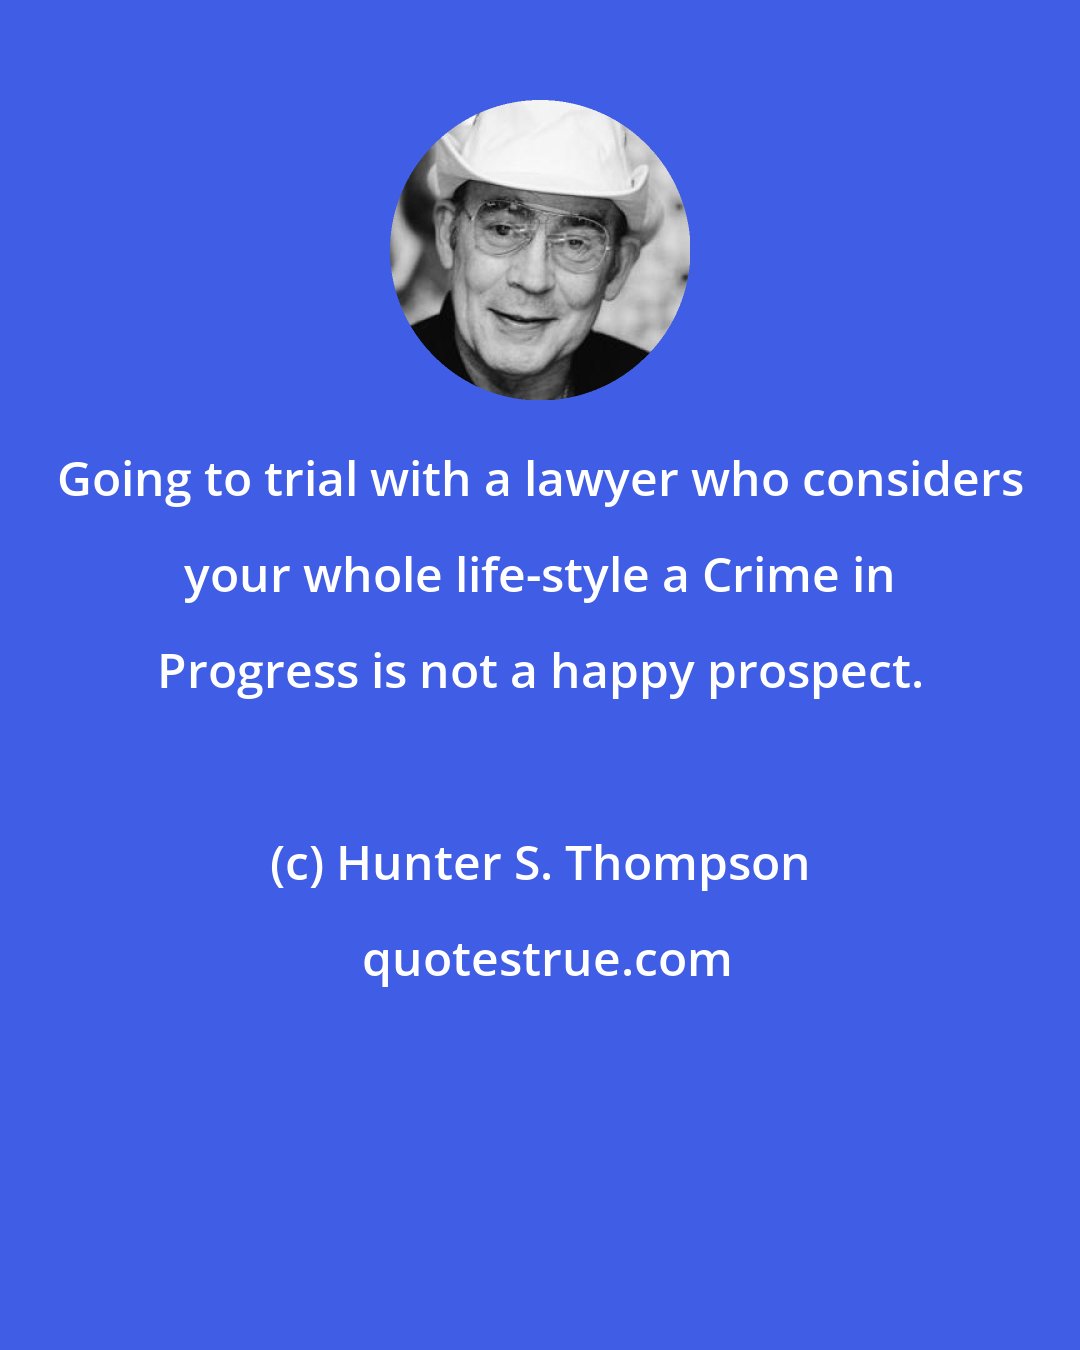 Hunter S. Thompson: Going to trial with a lawyer who considers your whole life-style a Crime in Progress is not a happy prospect.